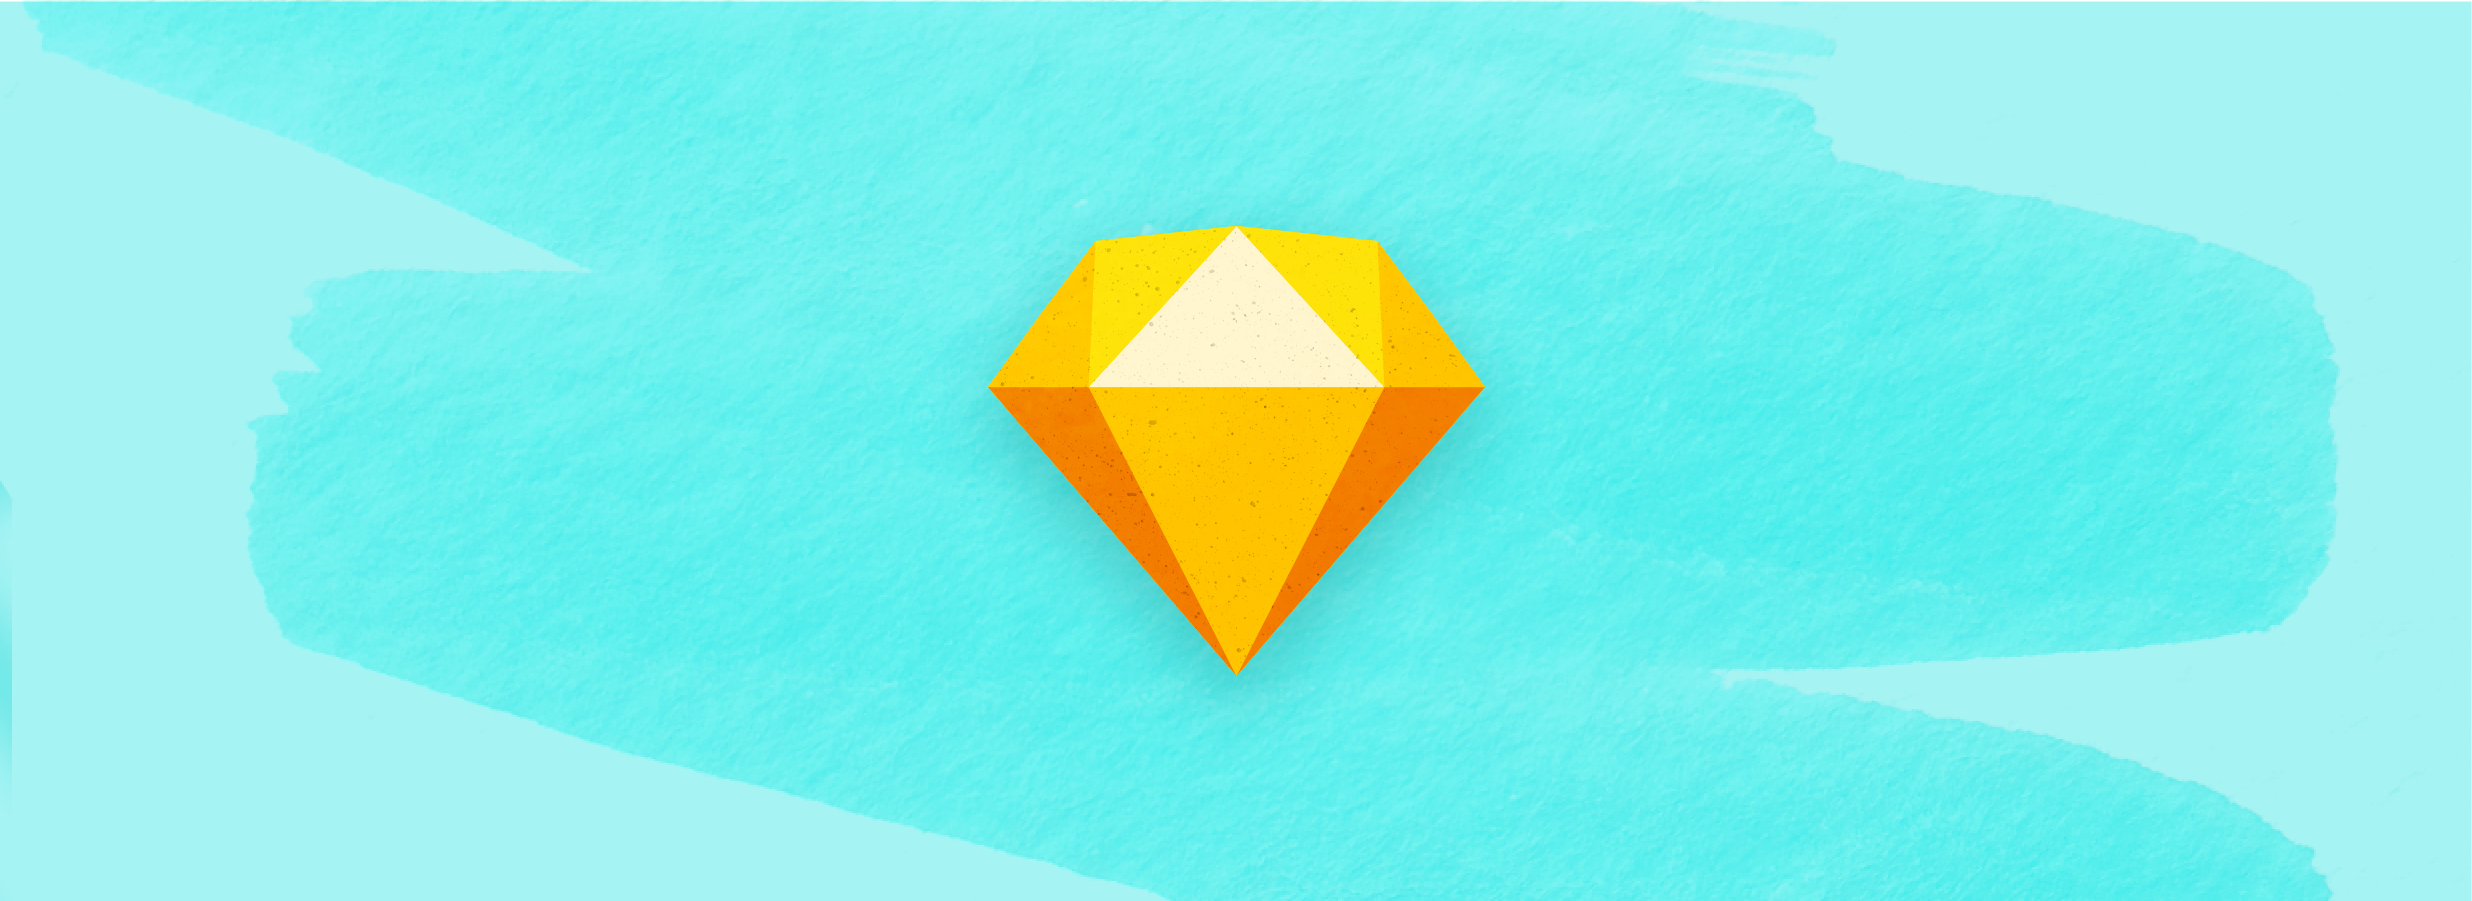 10 Tricks Techniques To Make The Most Out Of Sketch